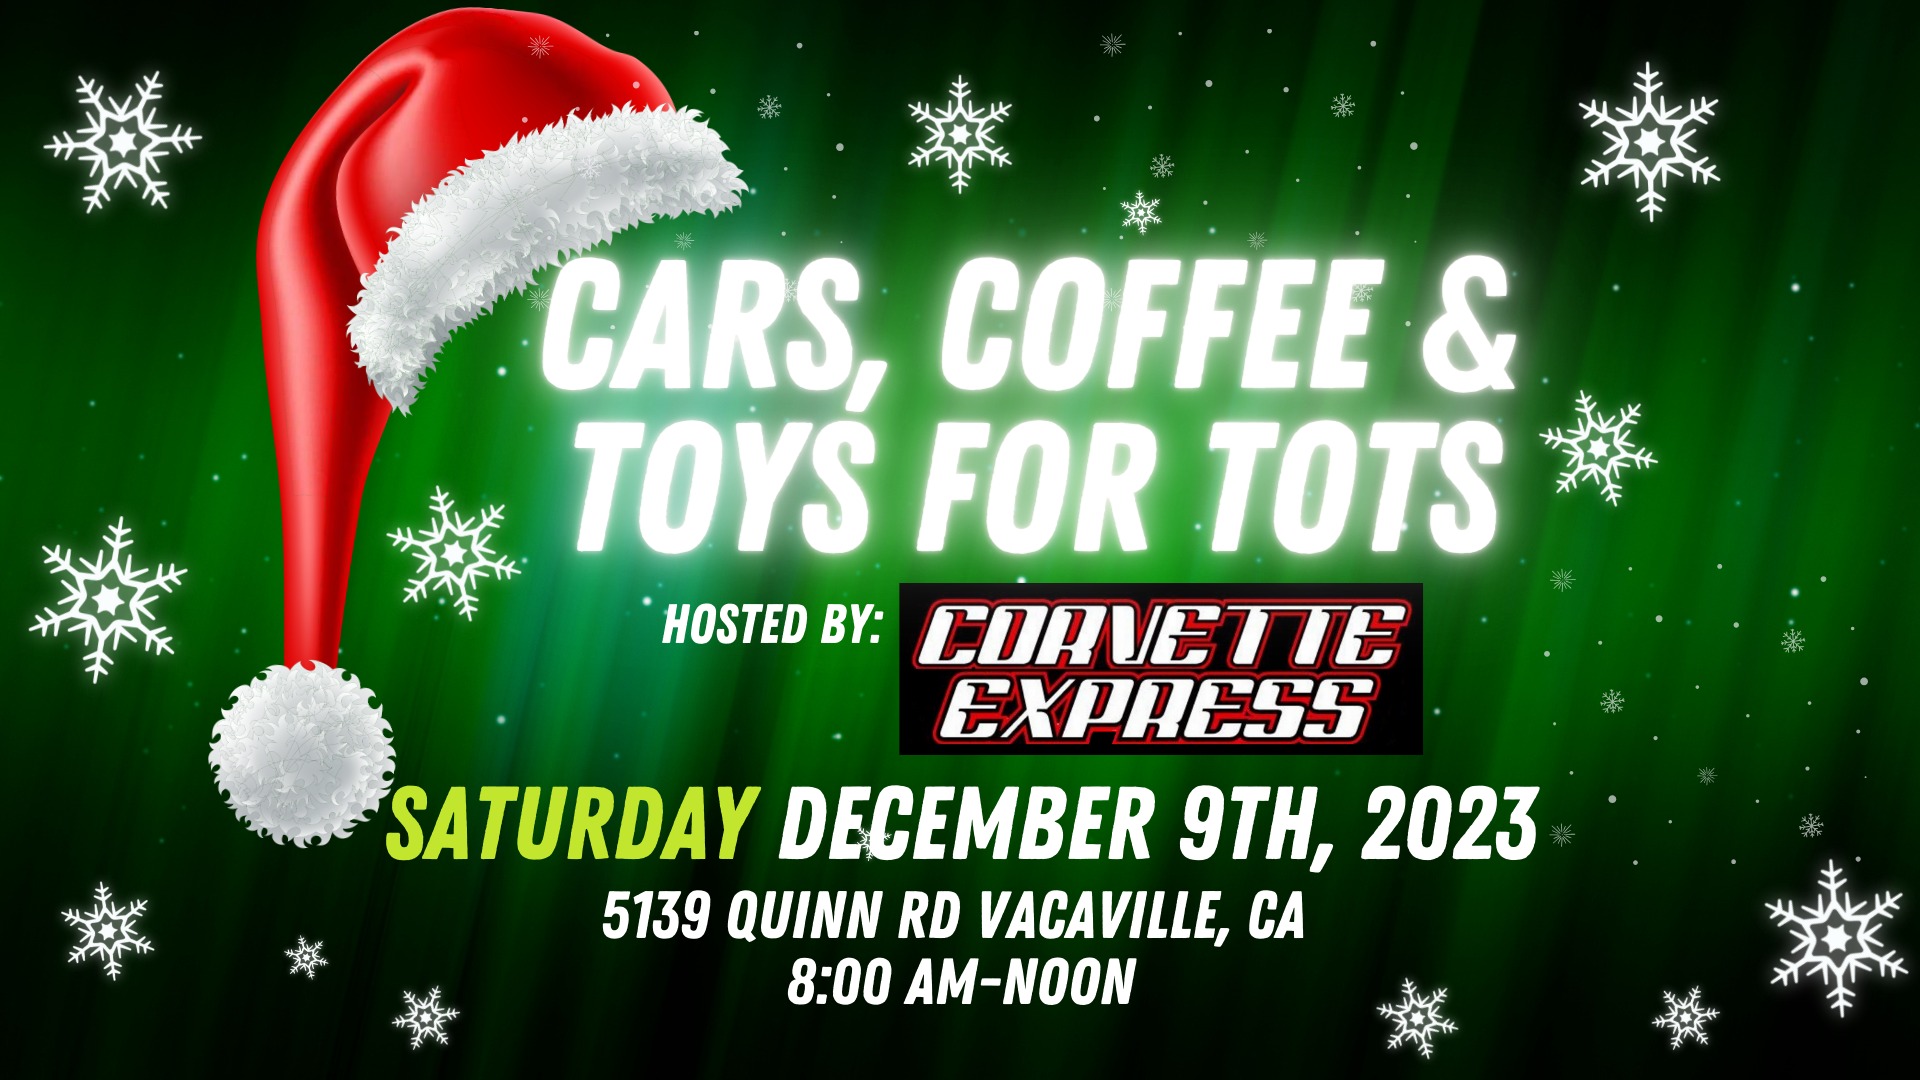 Cars Coffee & Toys For Tots